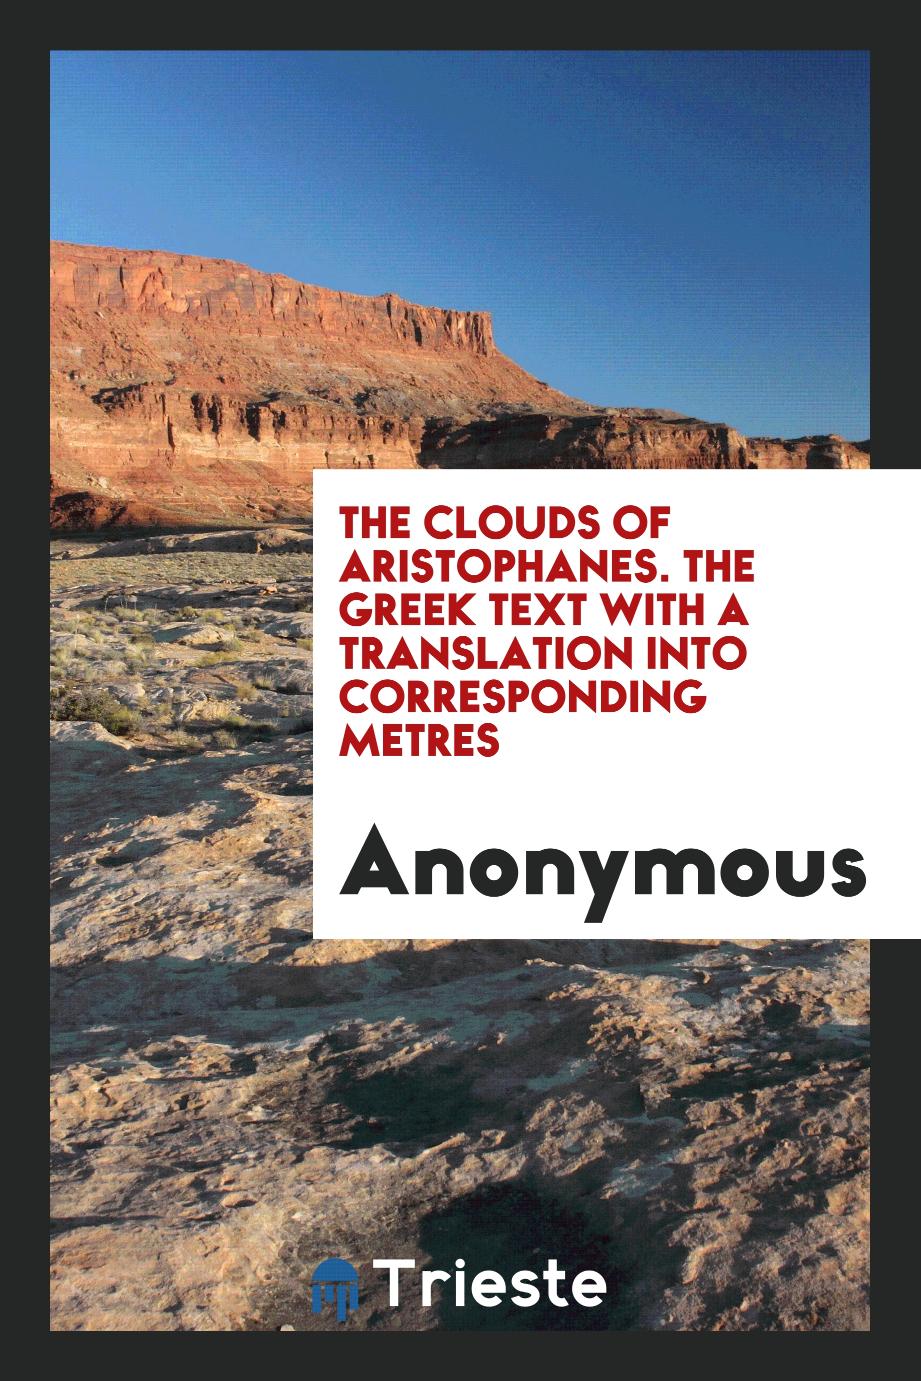 The Clouds of Aristophanes. The Greek Text with a Translation into Corresponding Metres